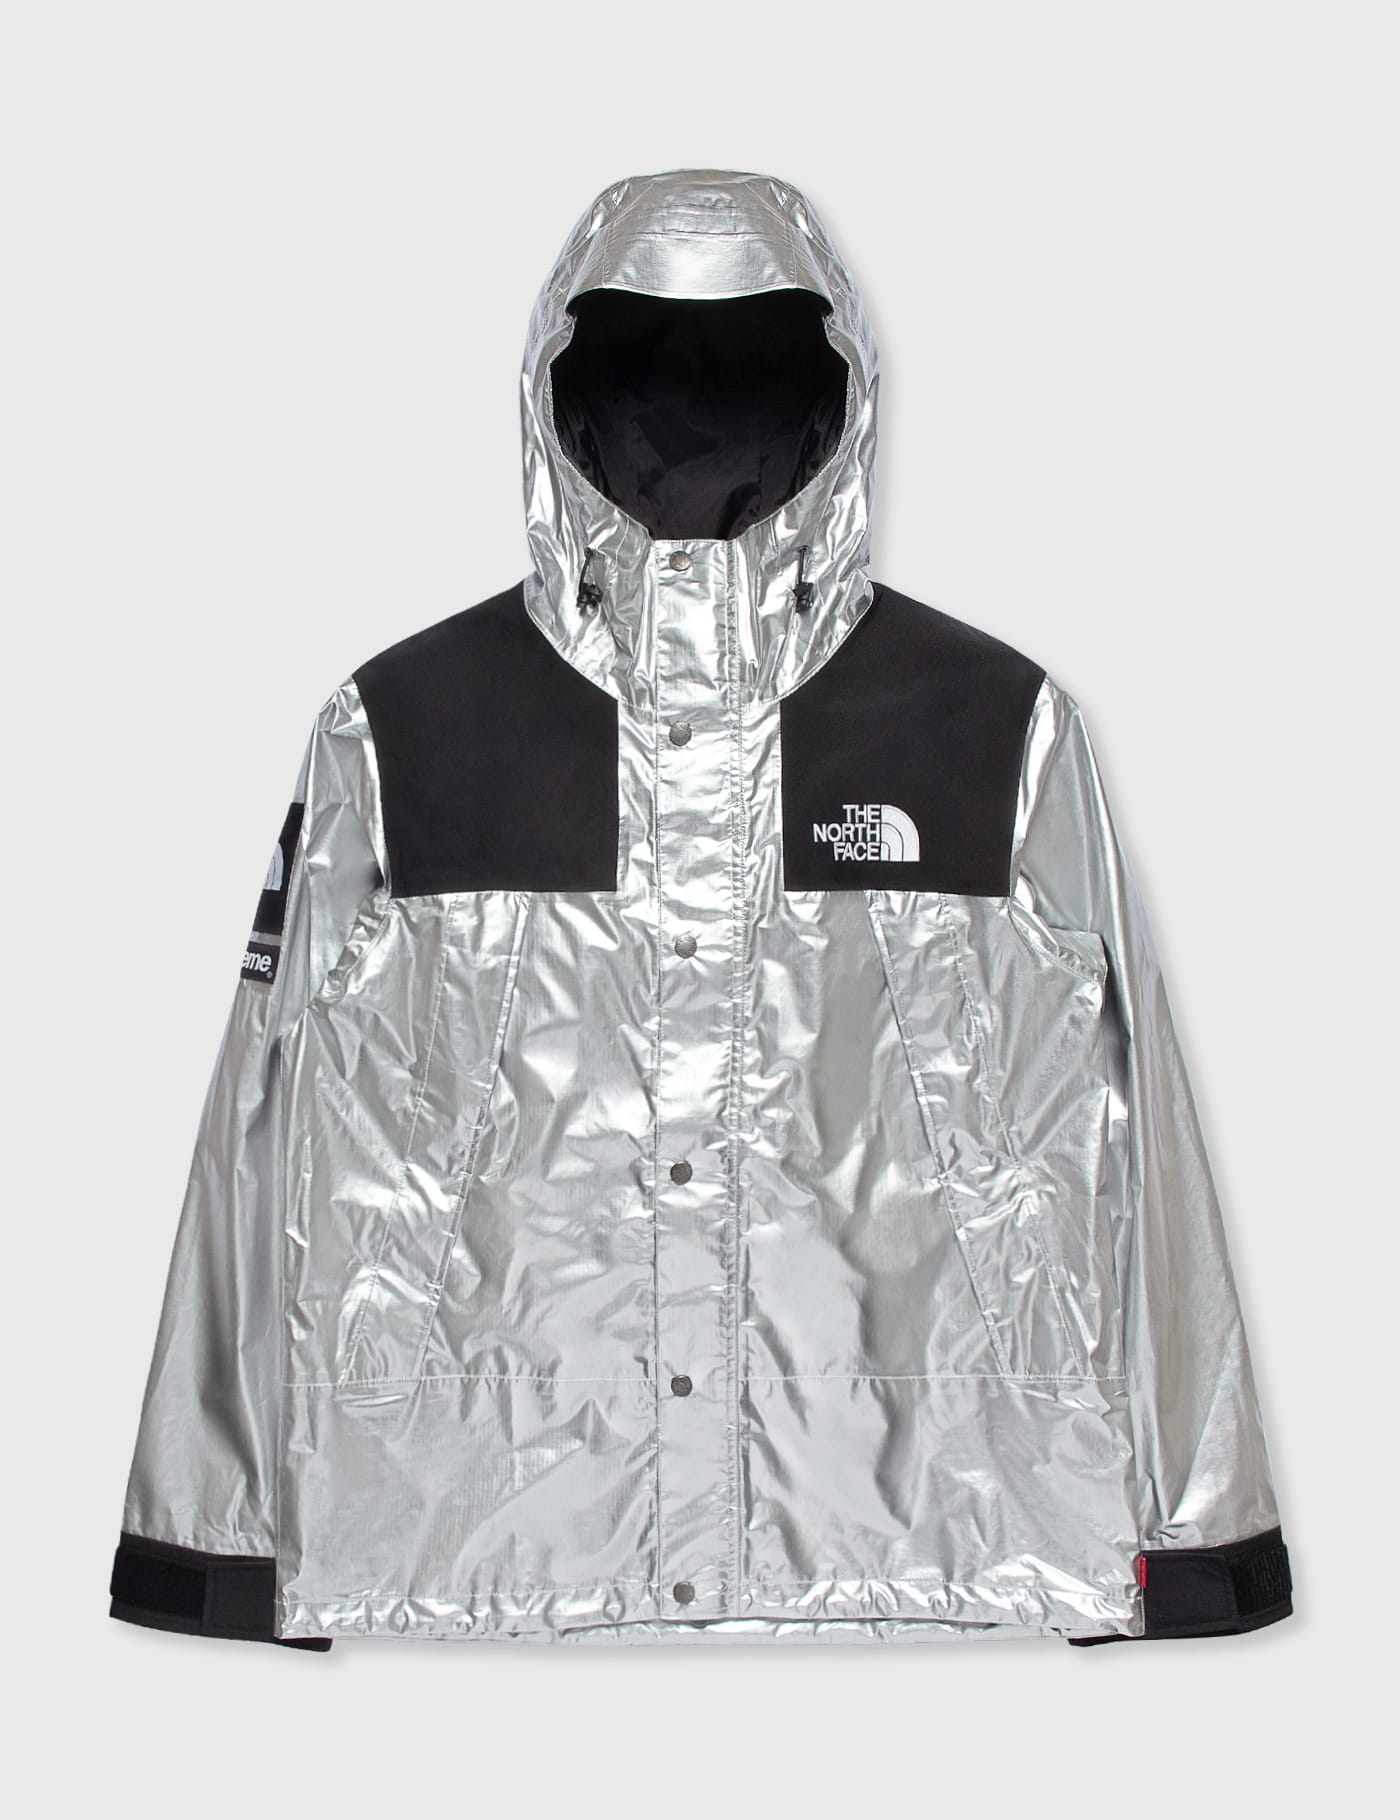 Supreme - Supreme x The North Face Metallic Mountain Parka | HBX - Globally  Curated Fashion and Lifestyle by Hypebeast